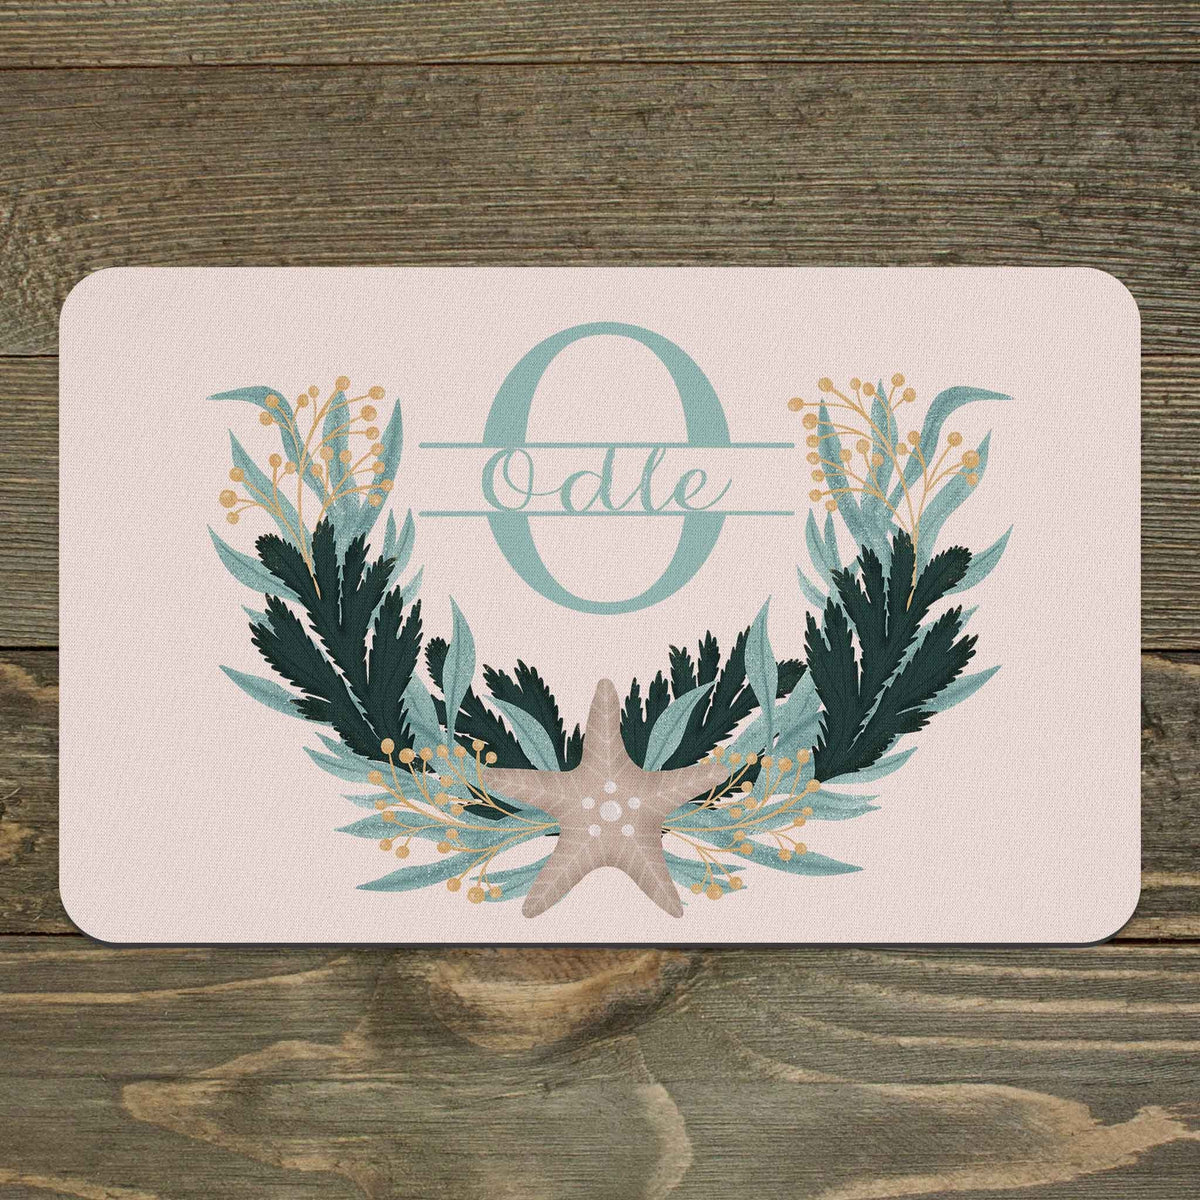 Custom Placemats | Personalized Dining and Serving | Coastal Christmas